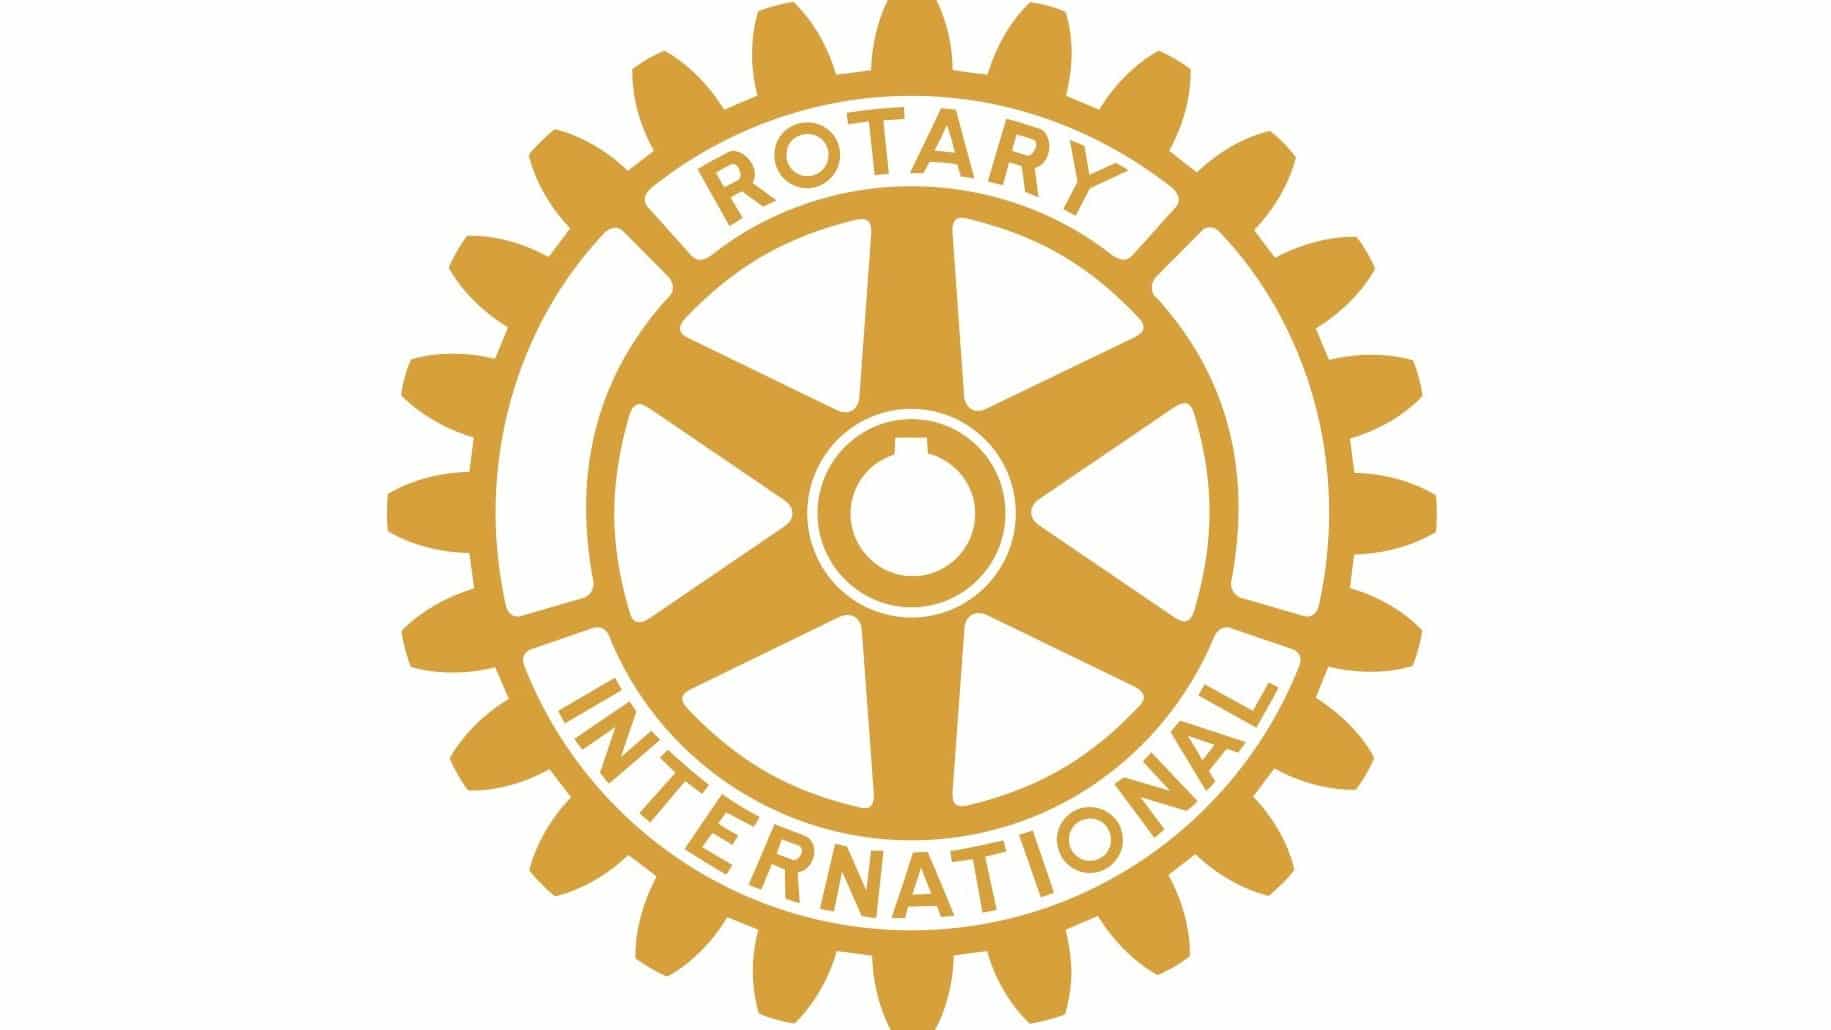 The Rotary Club of Guelph's Logo